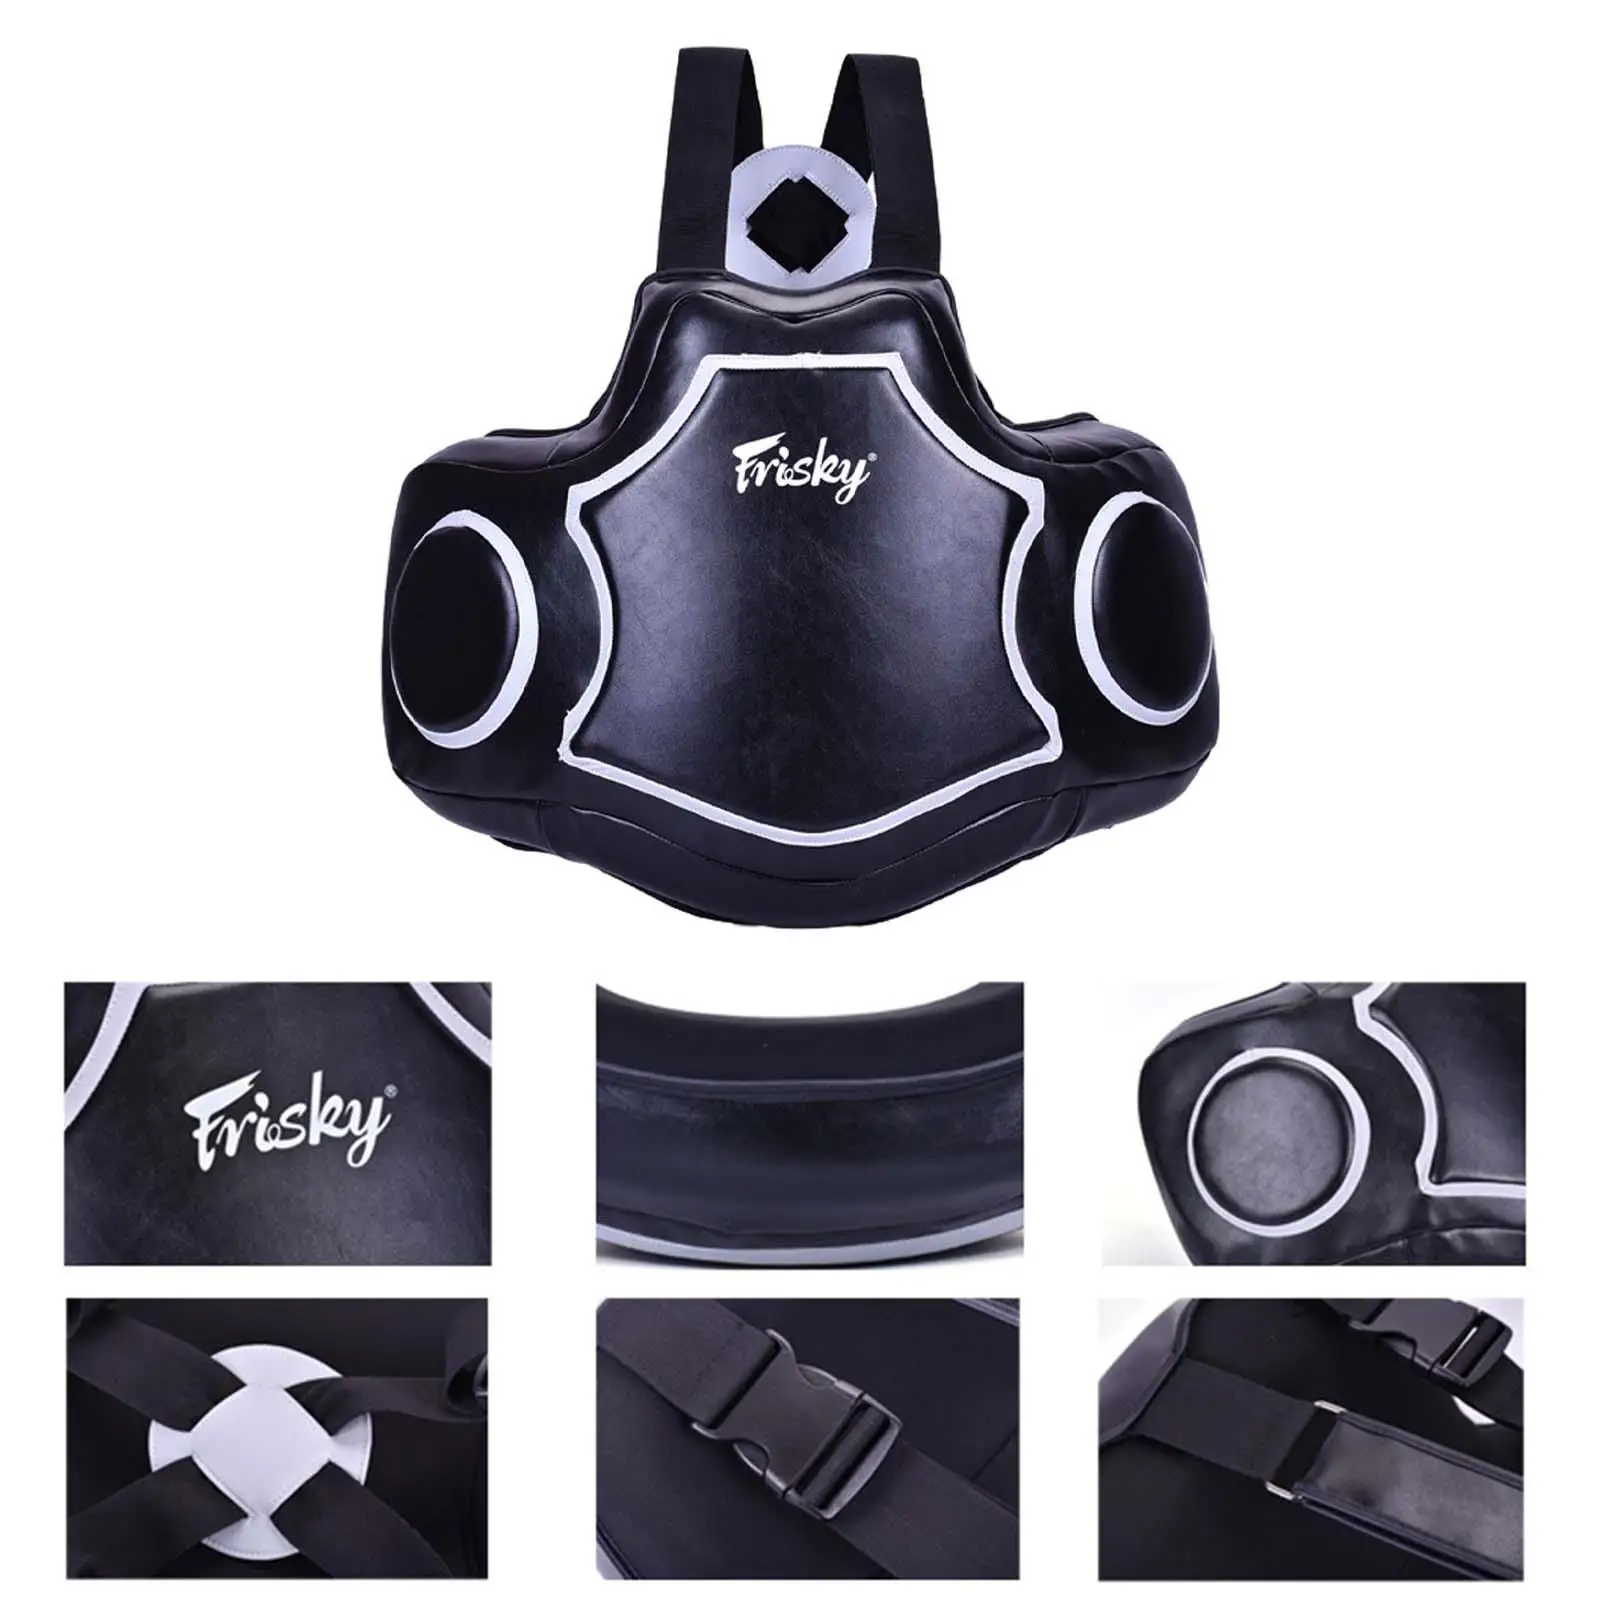 Boxing Body Protector, Body Guard, PU Leather Adult Professional Chest Protector, Boxing Protective Gear for Sanda